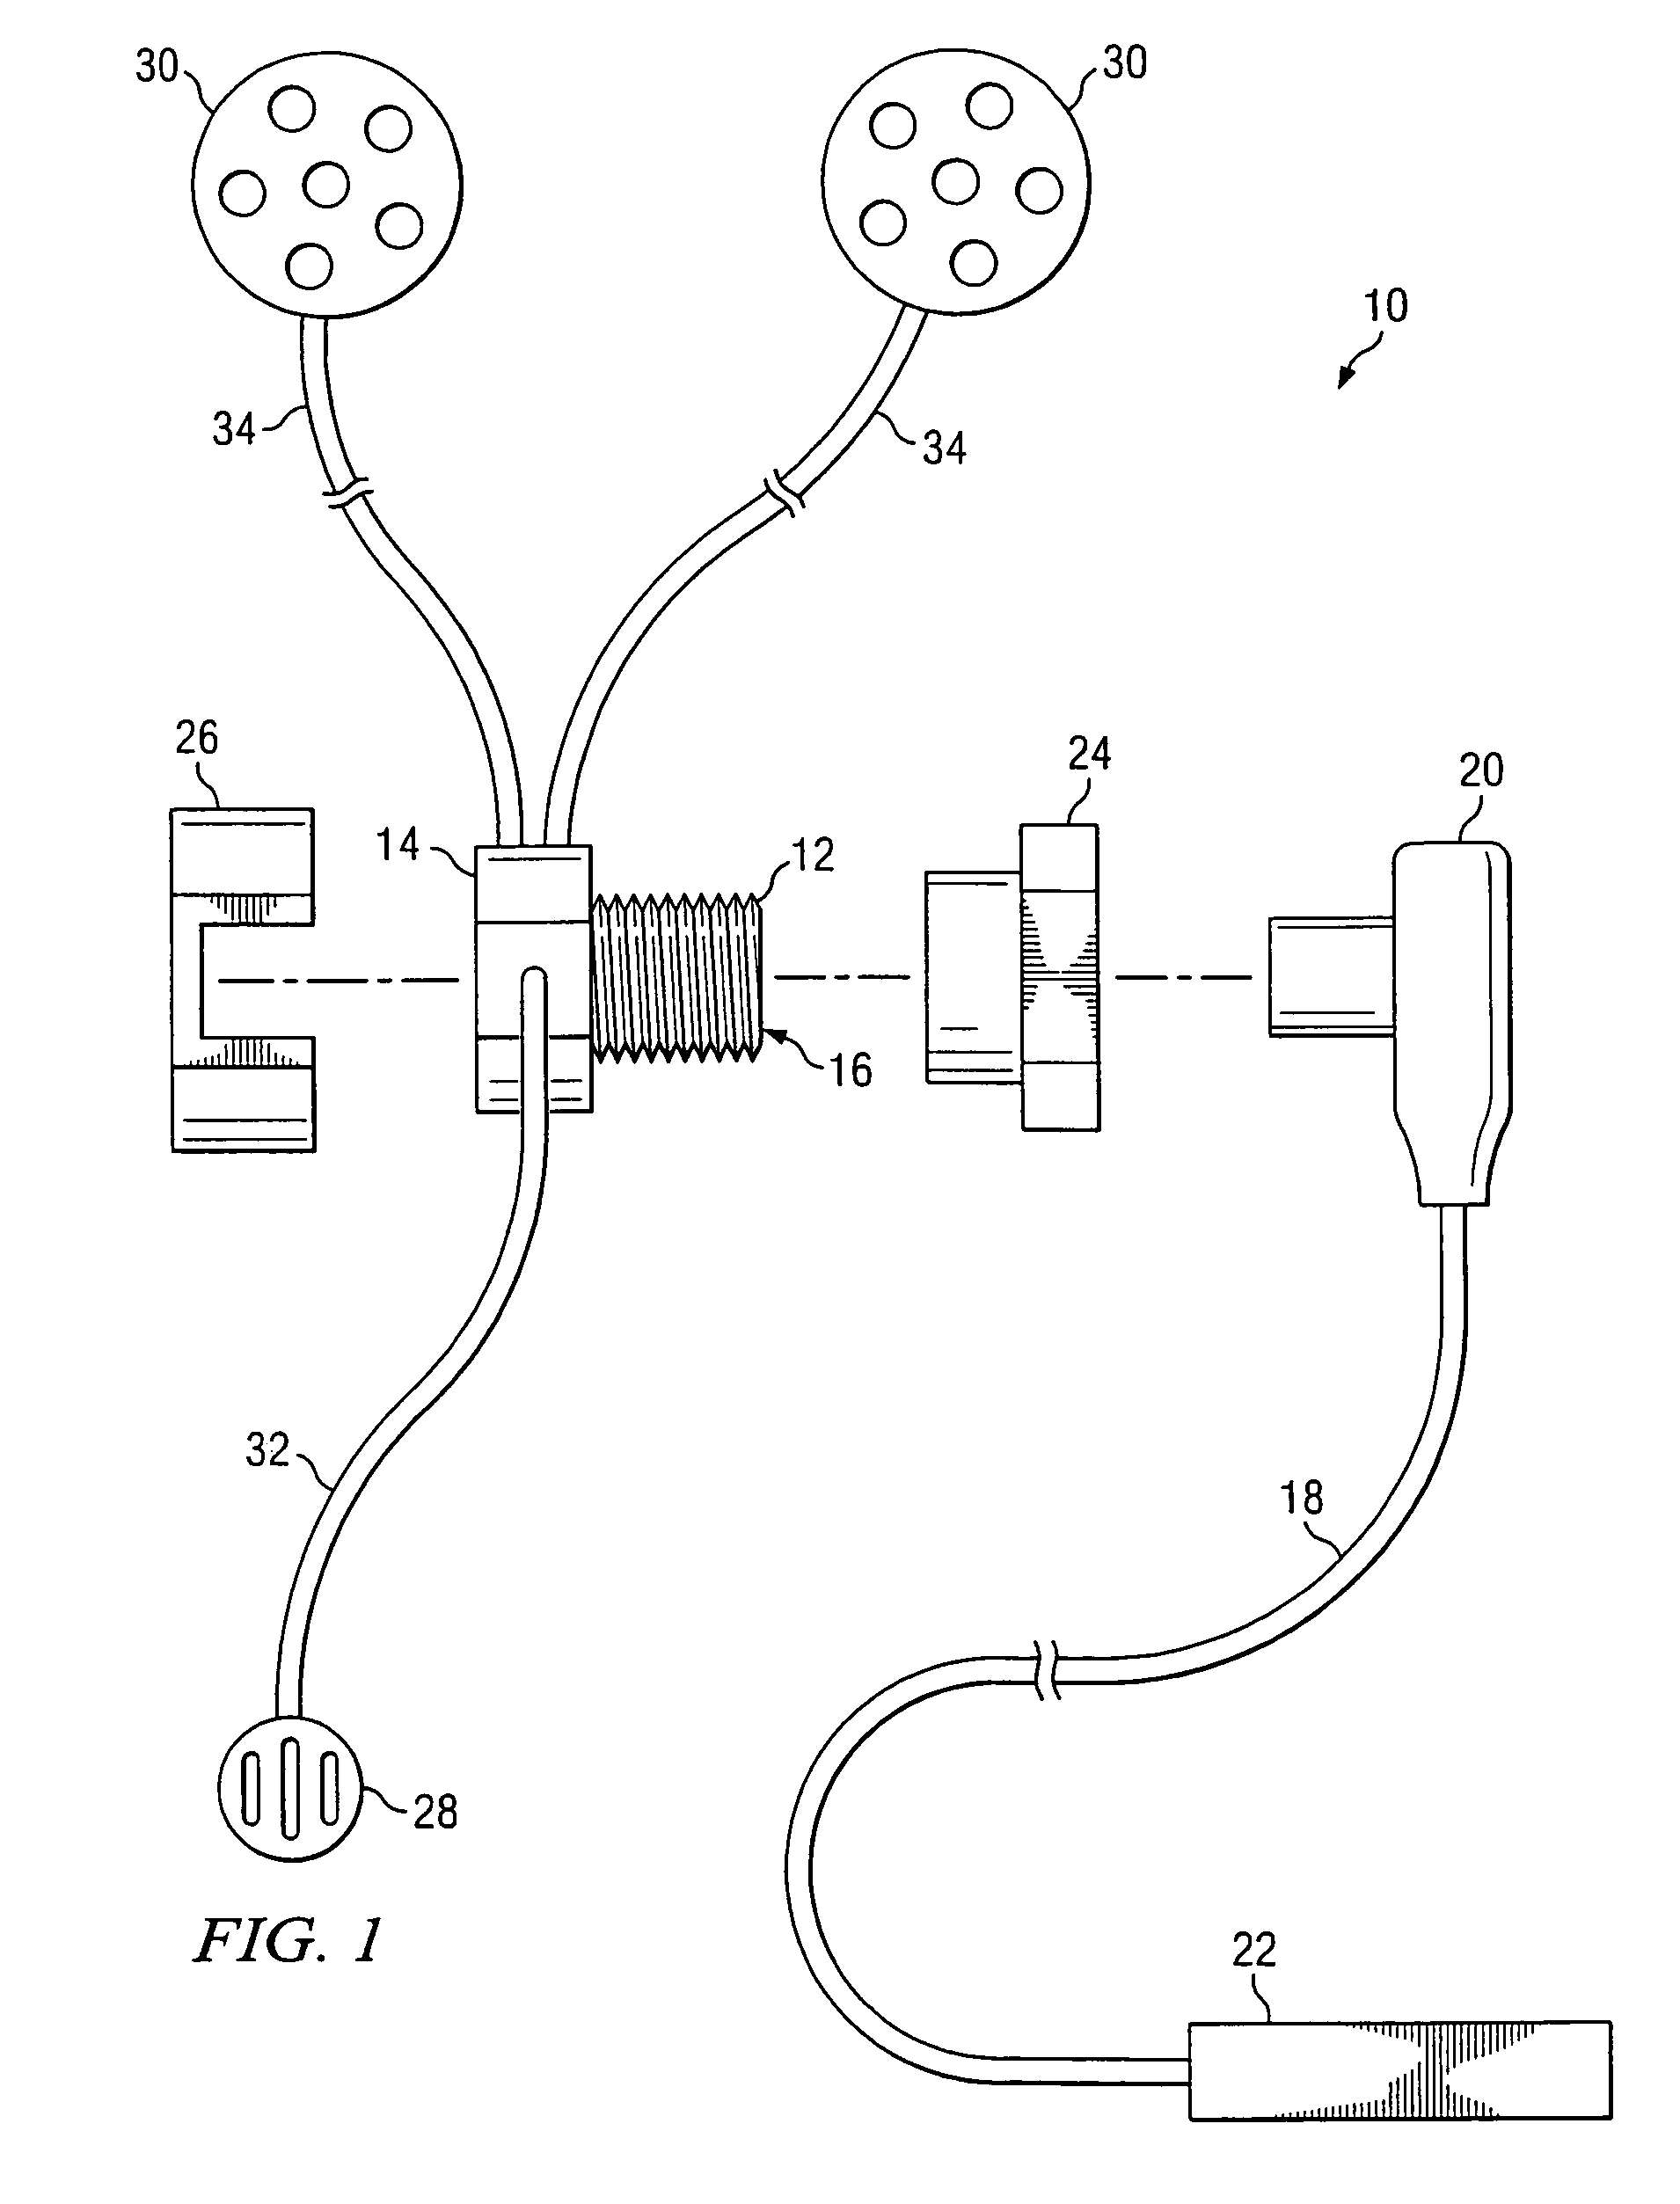 Helmet headset mounting assembly and method